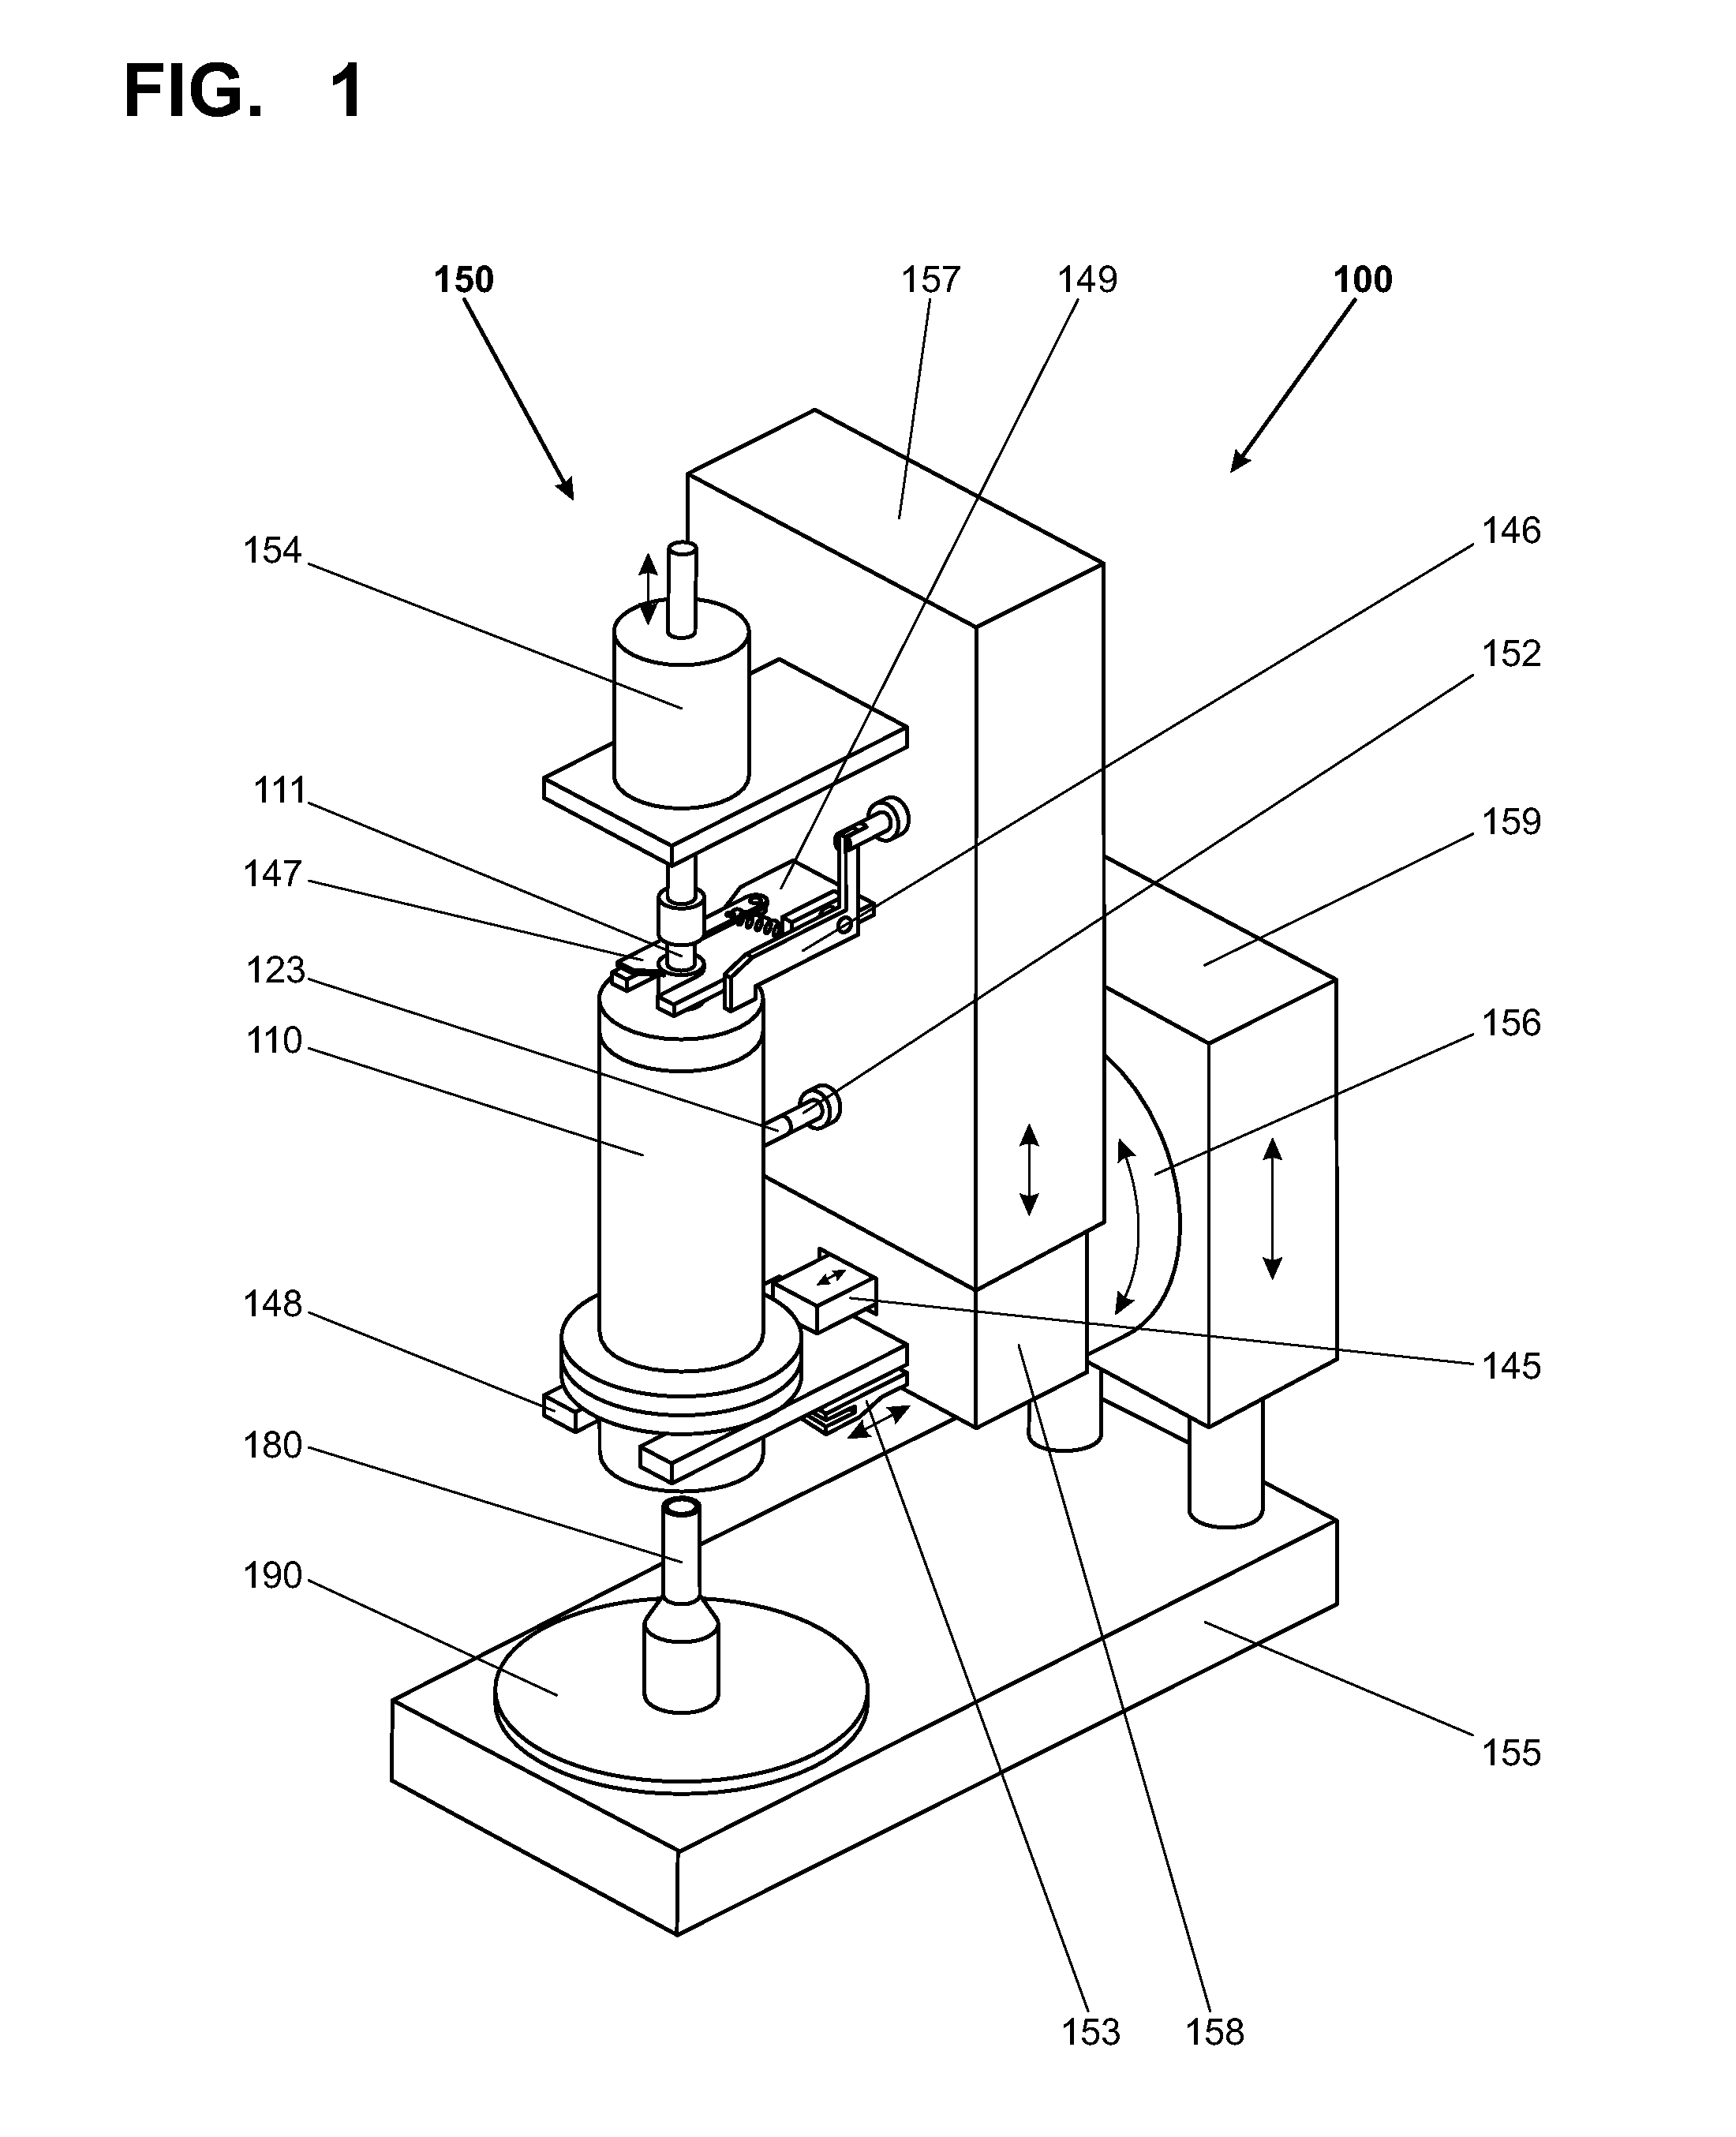 Dosage-dispensing device and dosage-dispensing unit with an electrostatic closure device